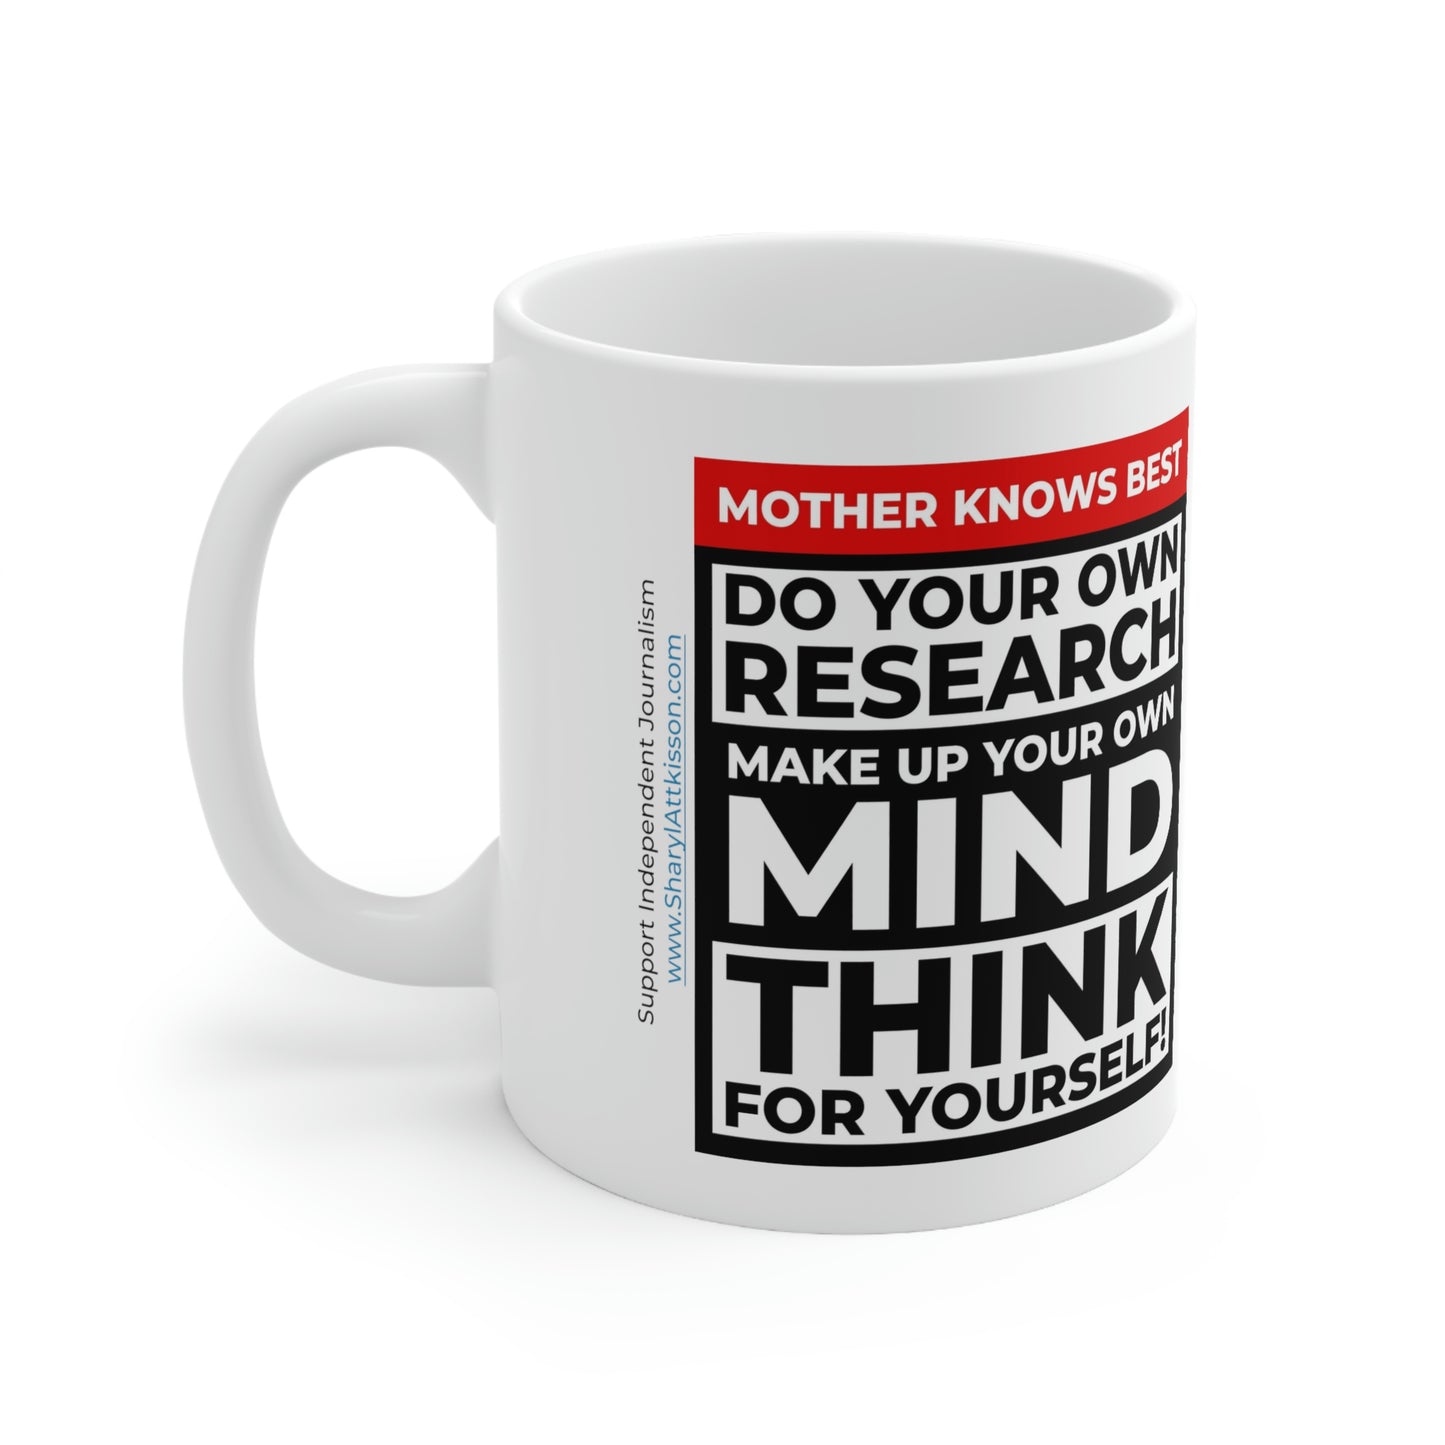 'Mother knows best... Do Your Own Research' Mug